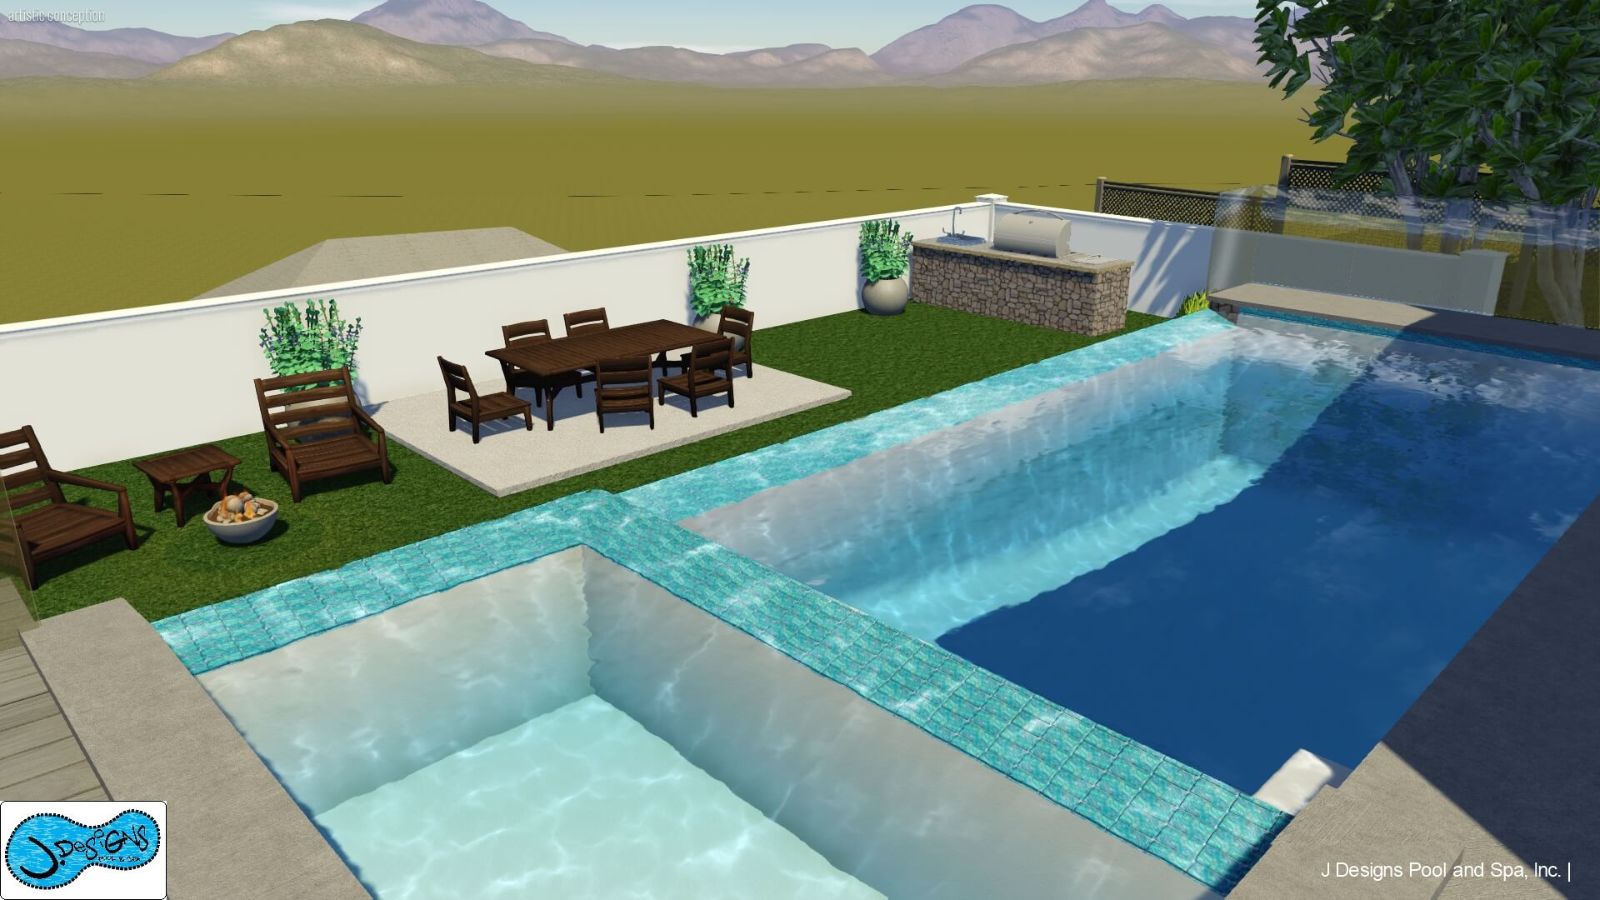 Advantages of Using One Pool Contractor for Custom Design & Build